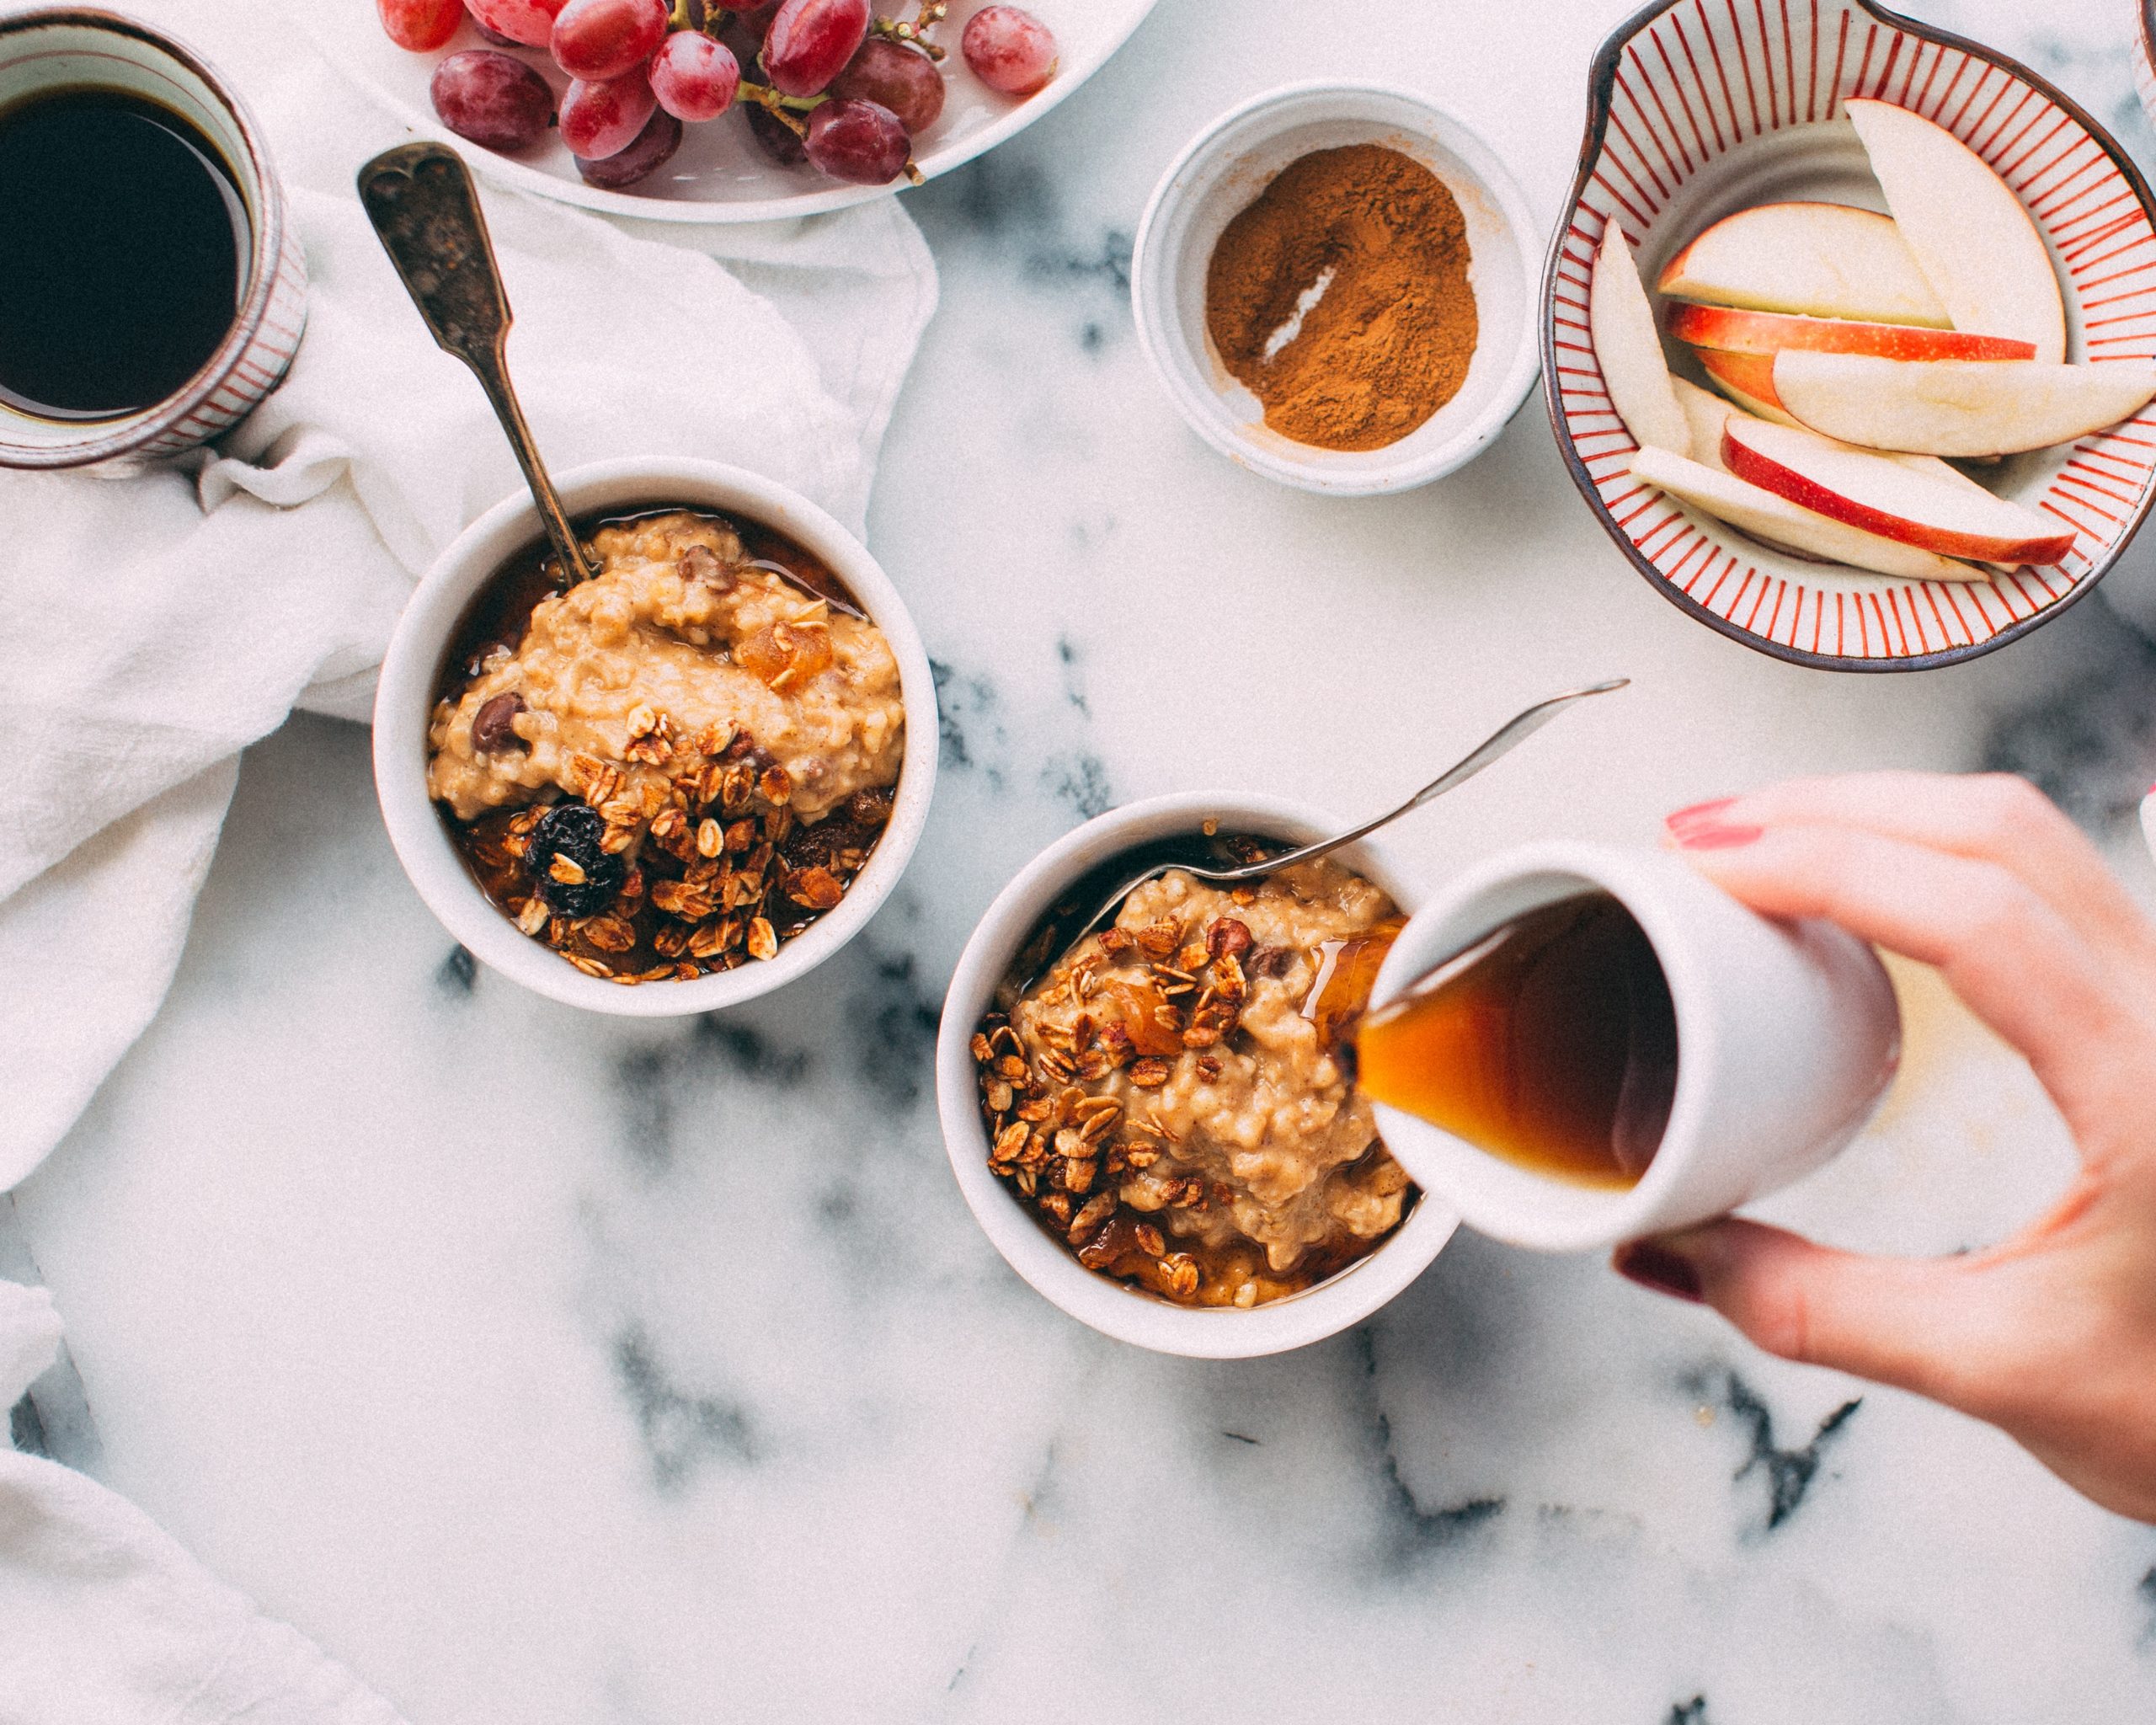 Image of oatmeal breakfast and coffee